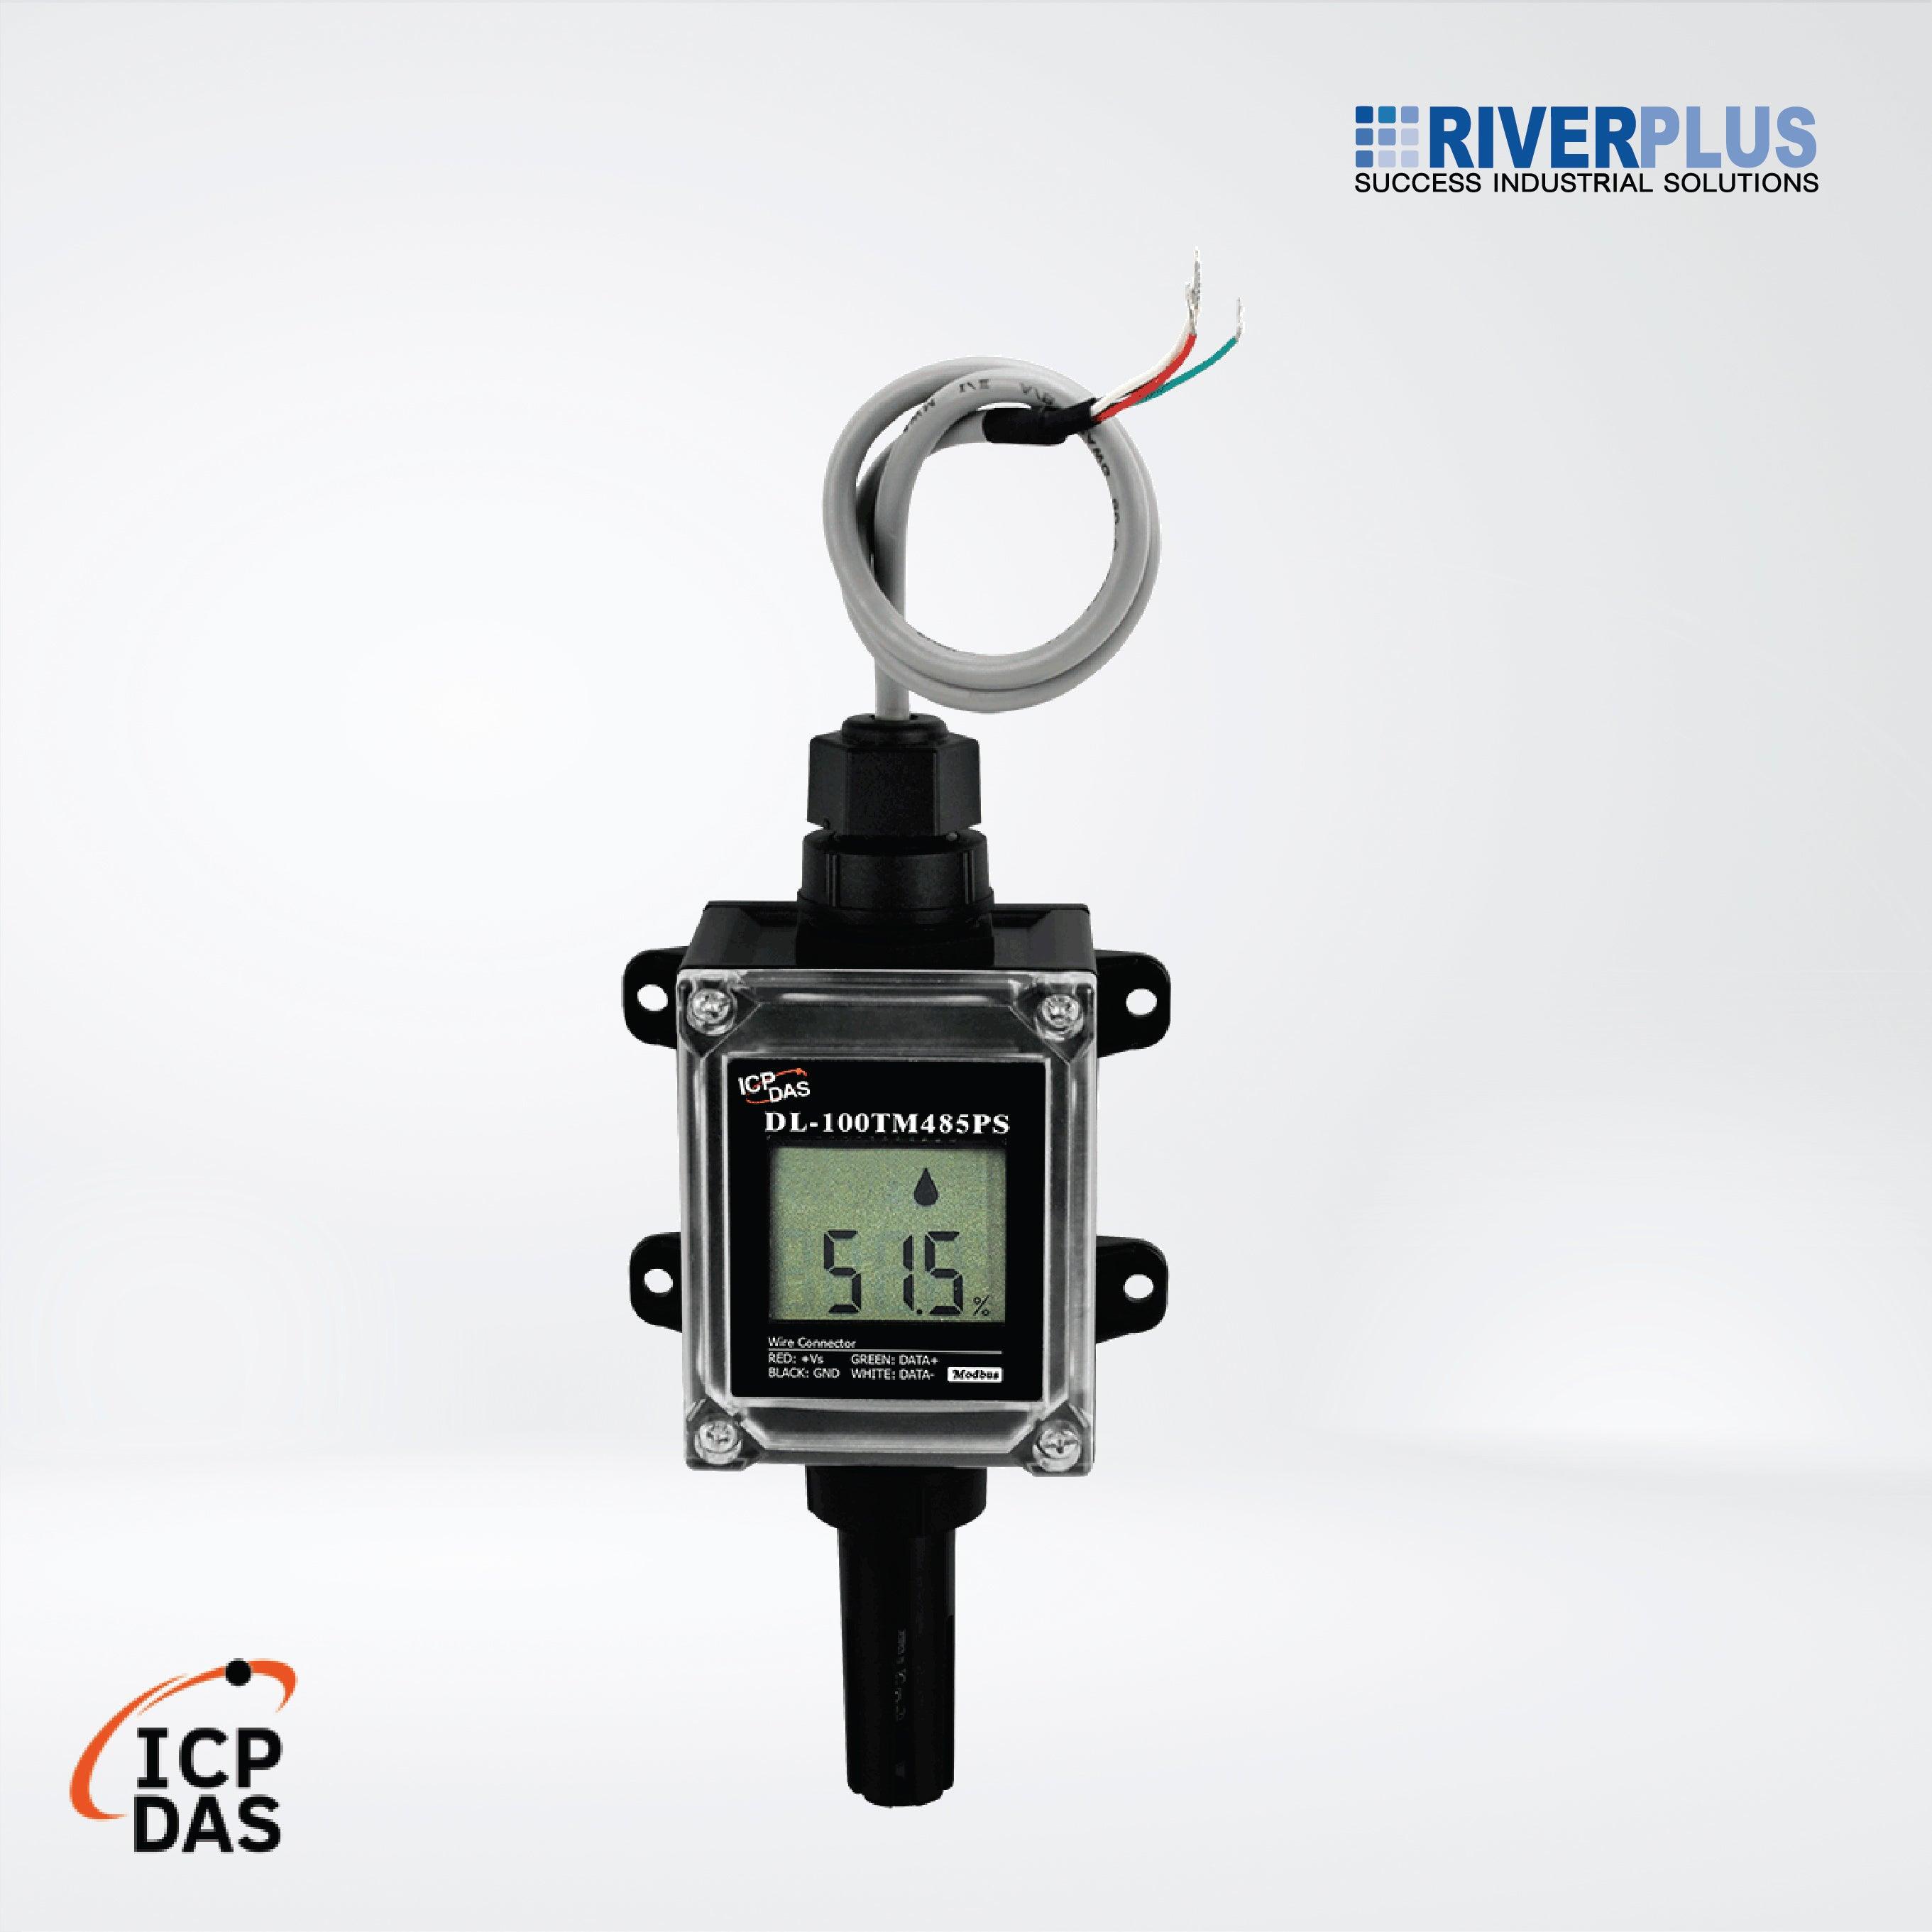 DL-100TM485PS IP66 Remote Temperature and Humidity Data Logger with LCD Display (High Accuracy, RS-485) - Riverplus